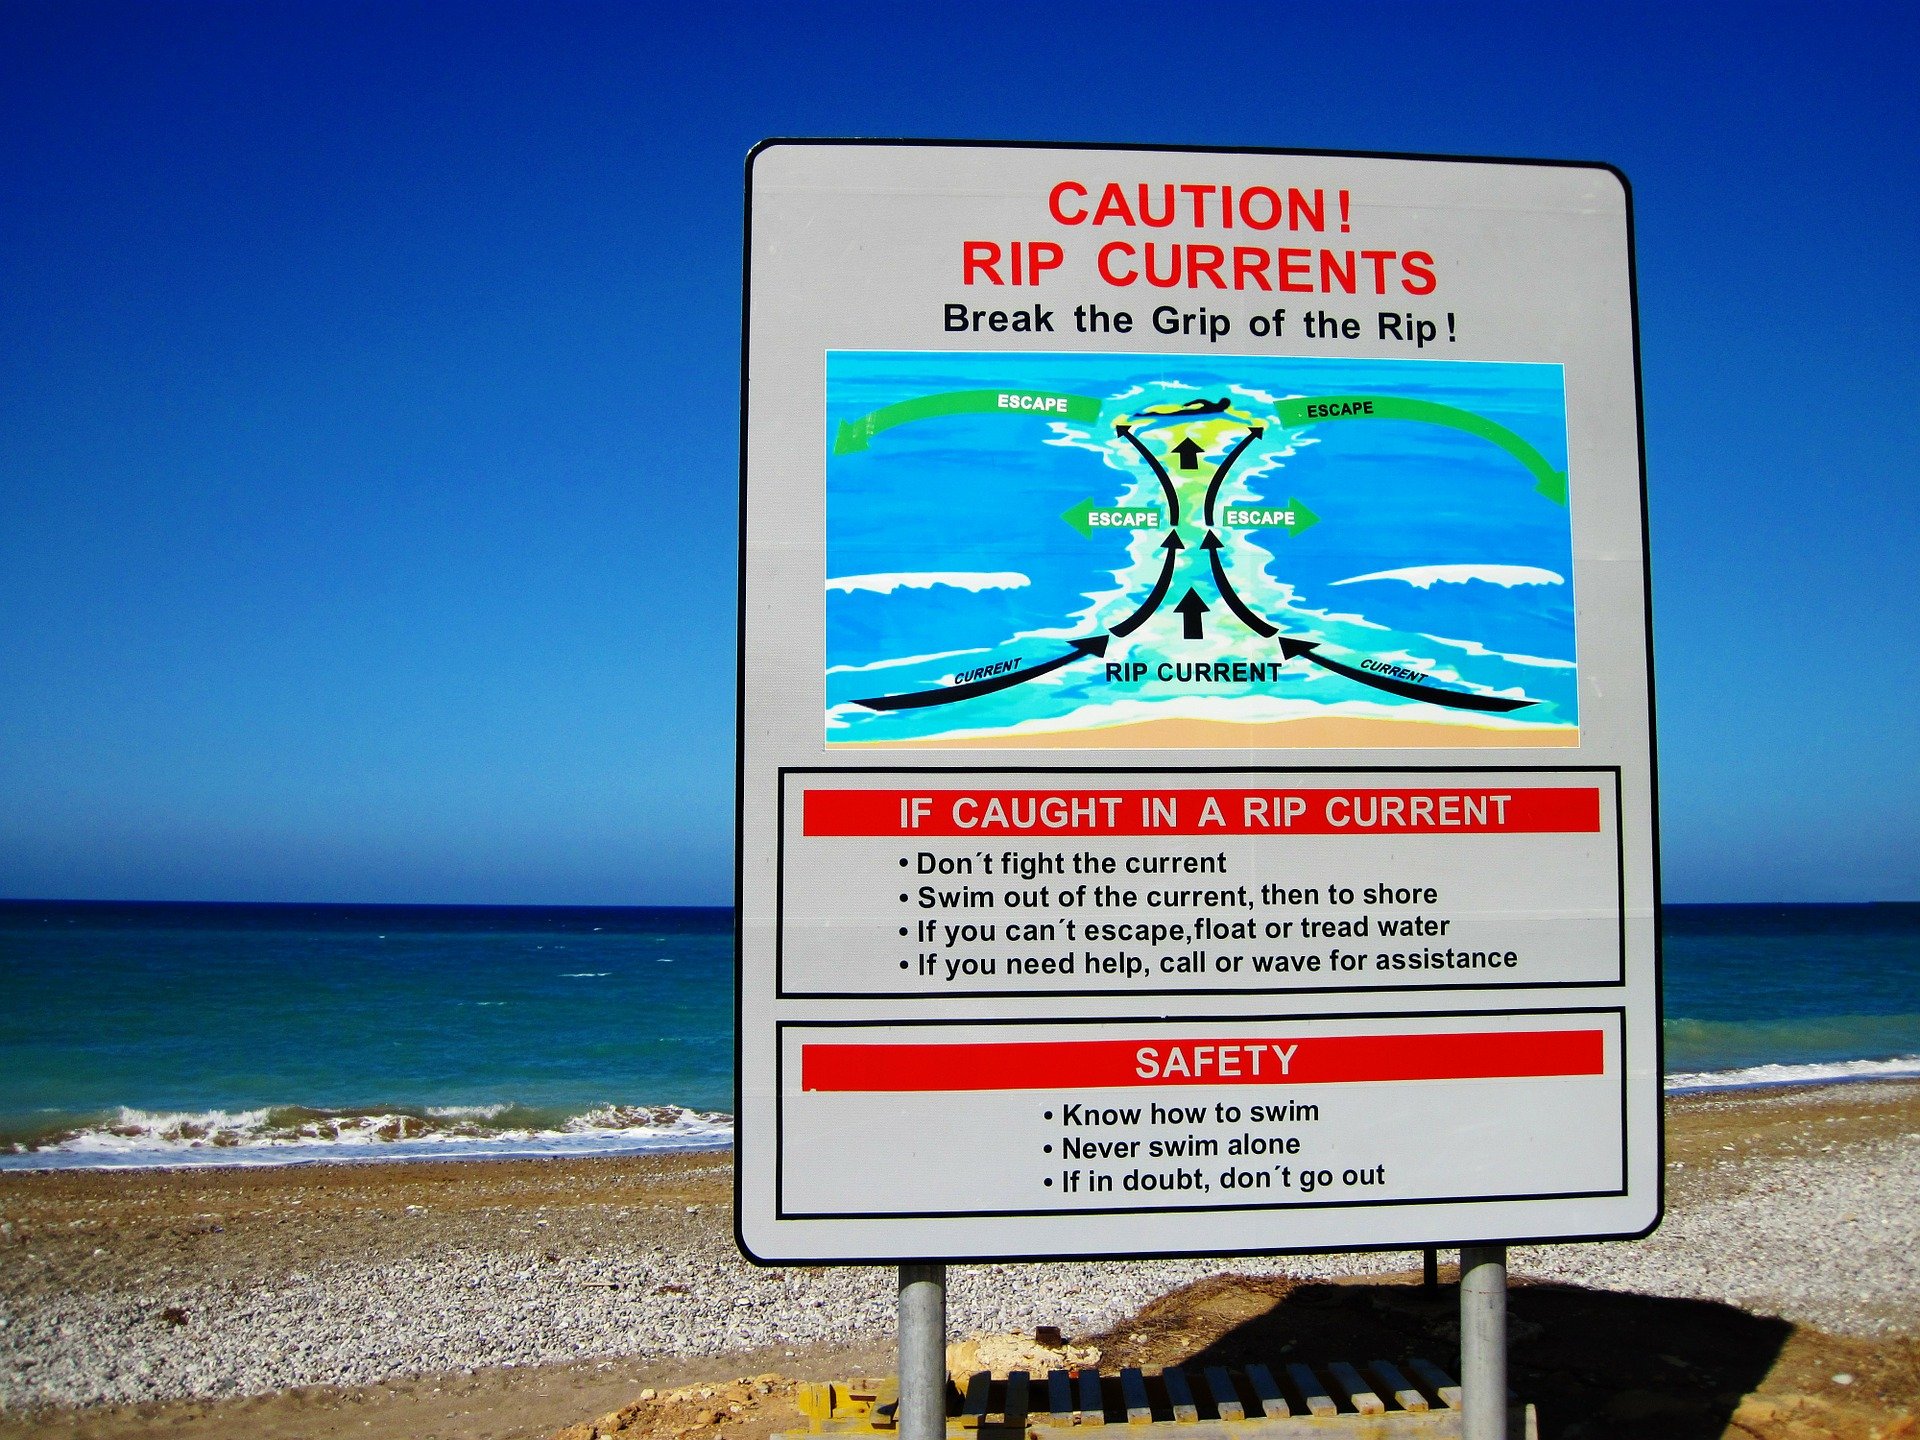 A signboard at the beach about how to survive being stuck in a rip current | Photo: Pixabay/PublicDomainPictures